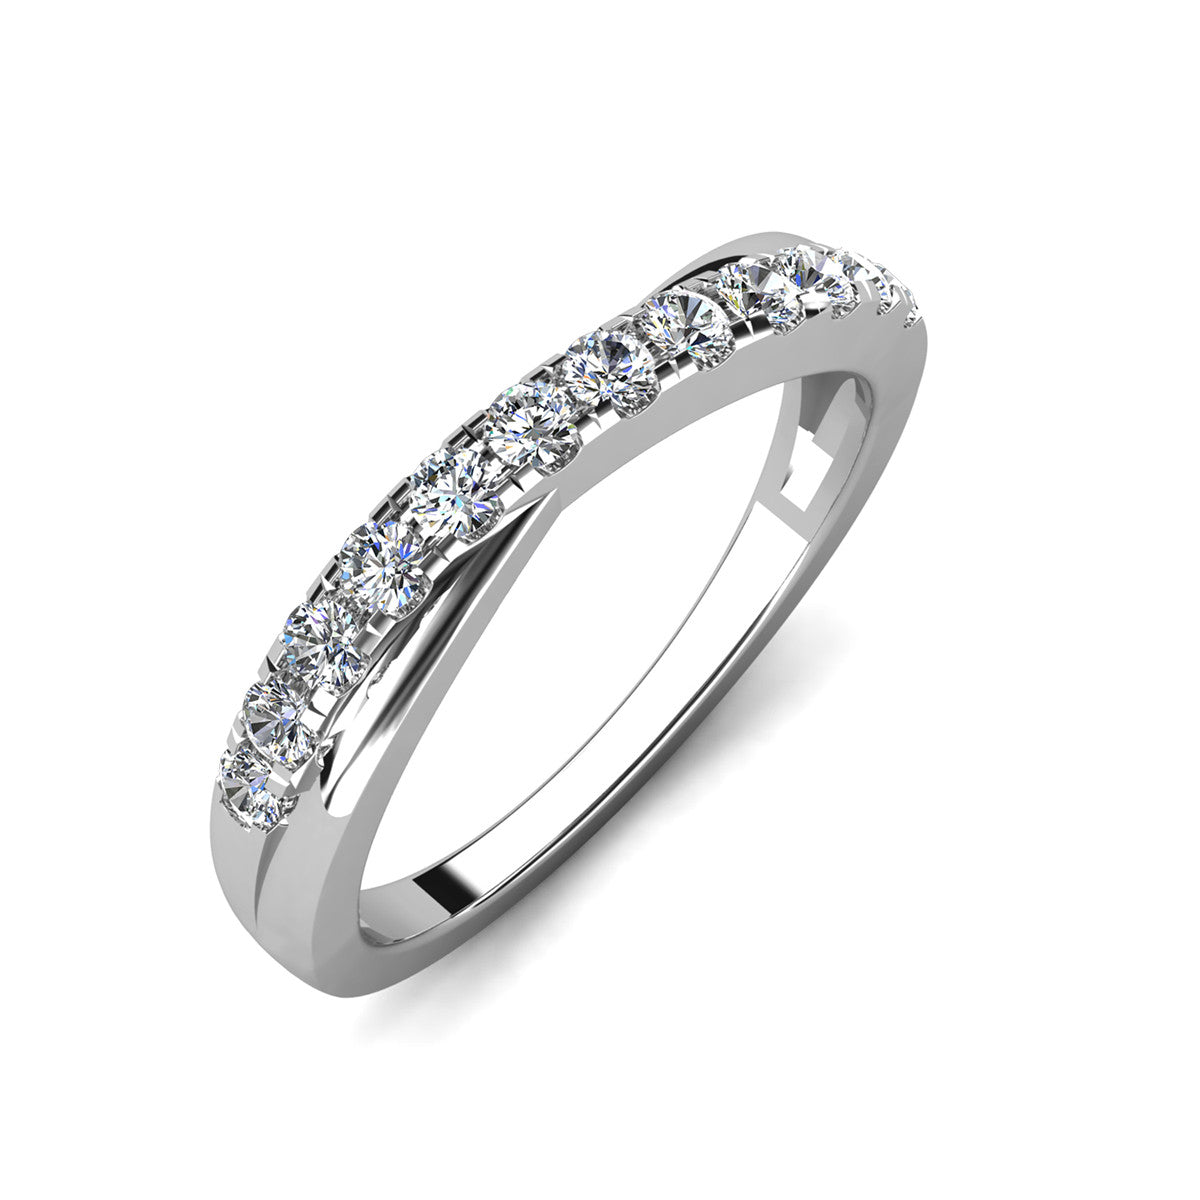 Moissanite by Cate & Chloe Emerson Sterling Silver Ring with Moissanite Crystals